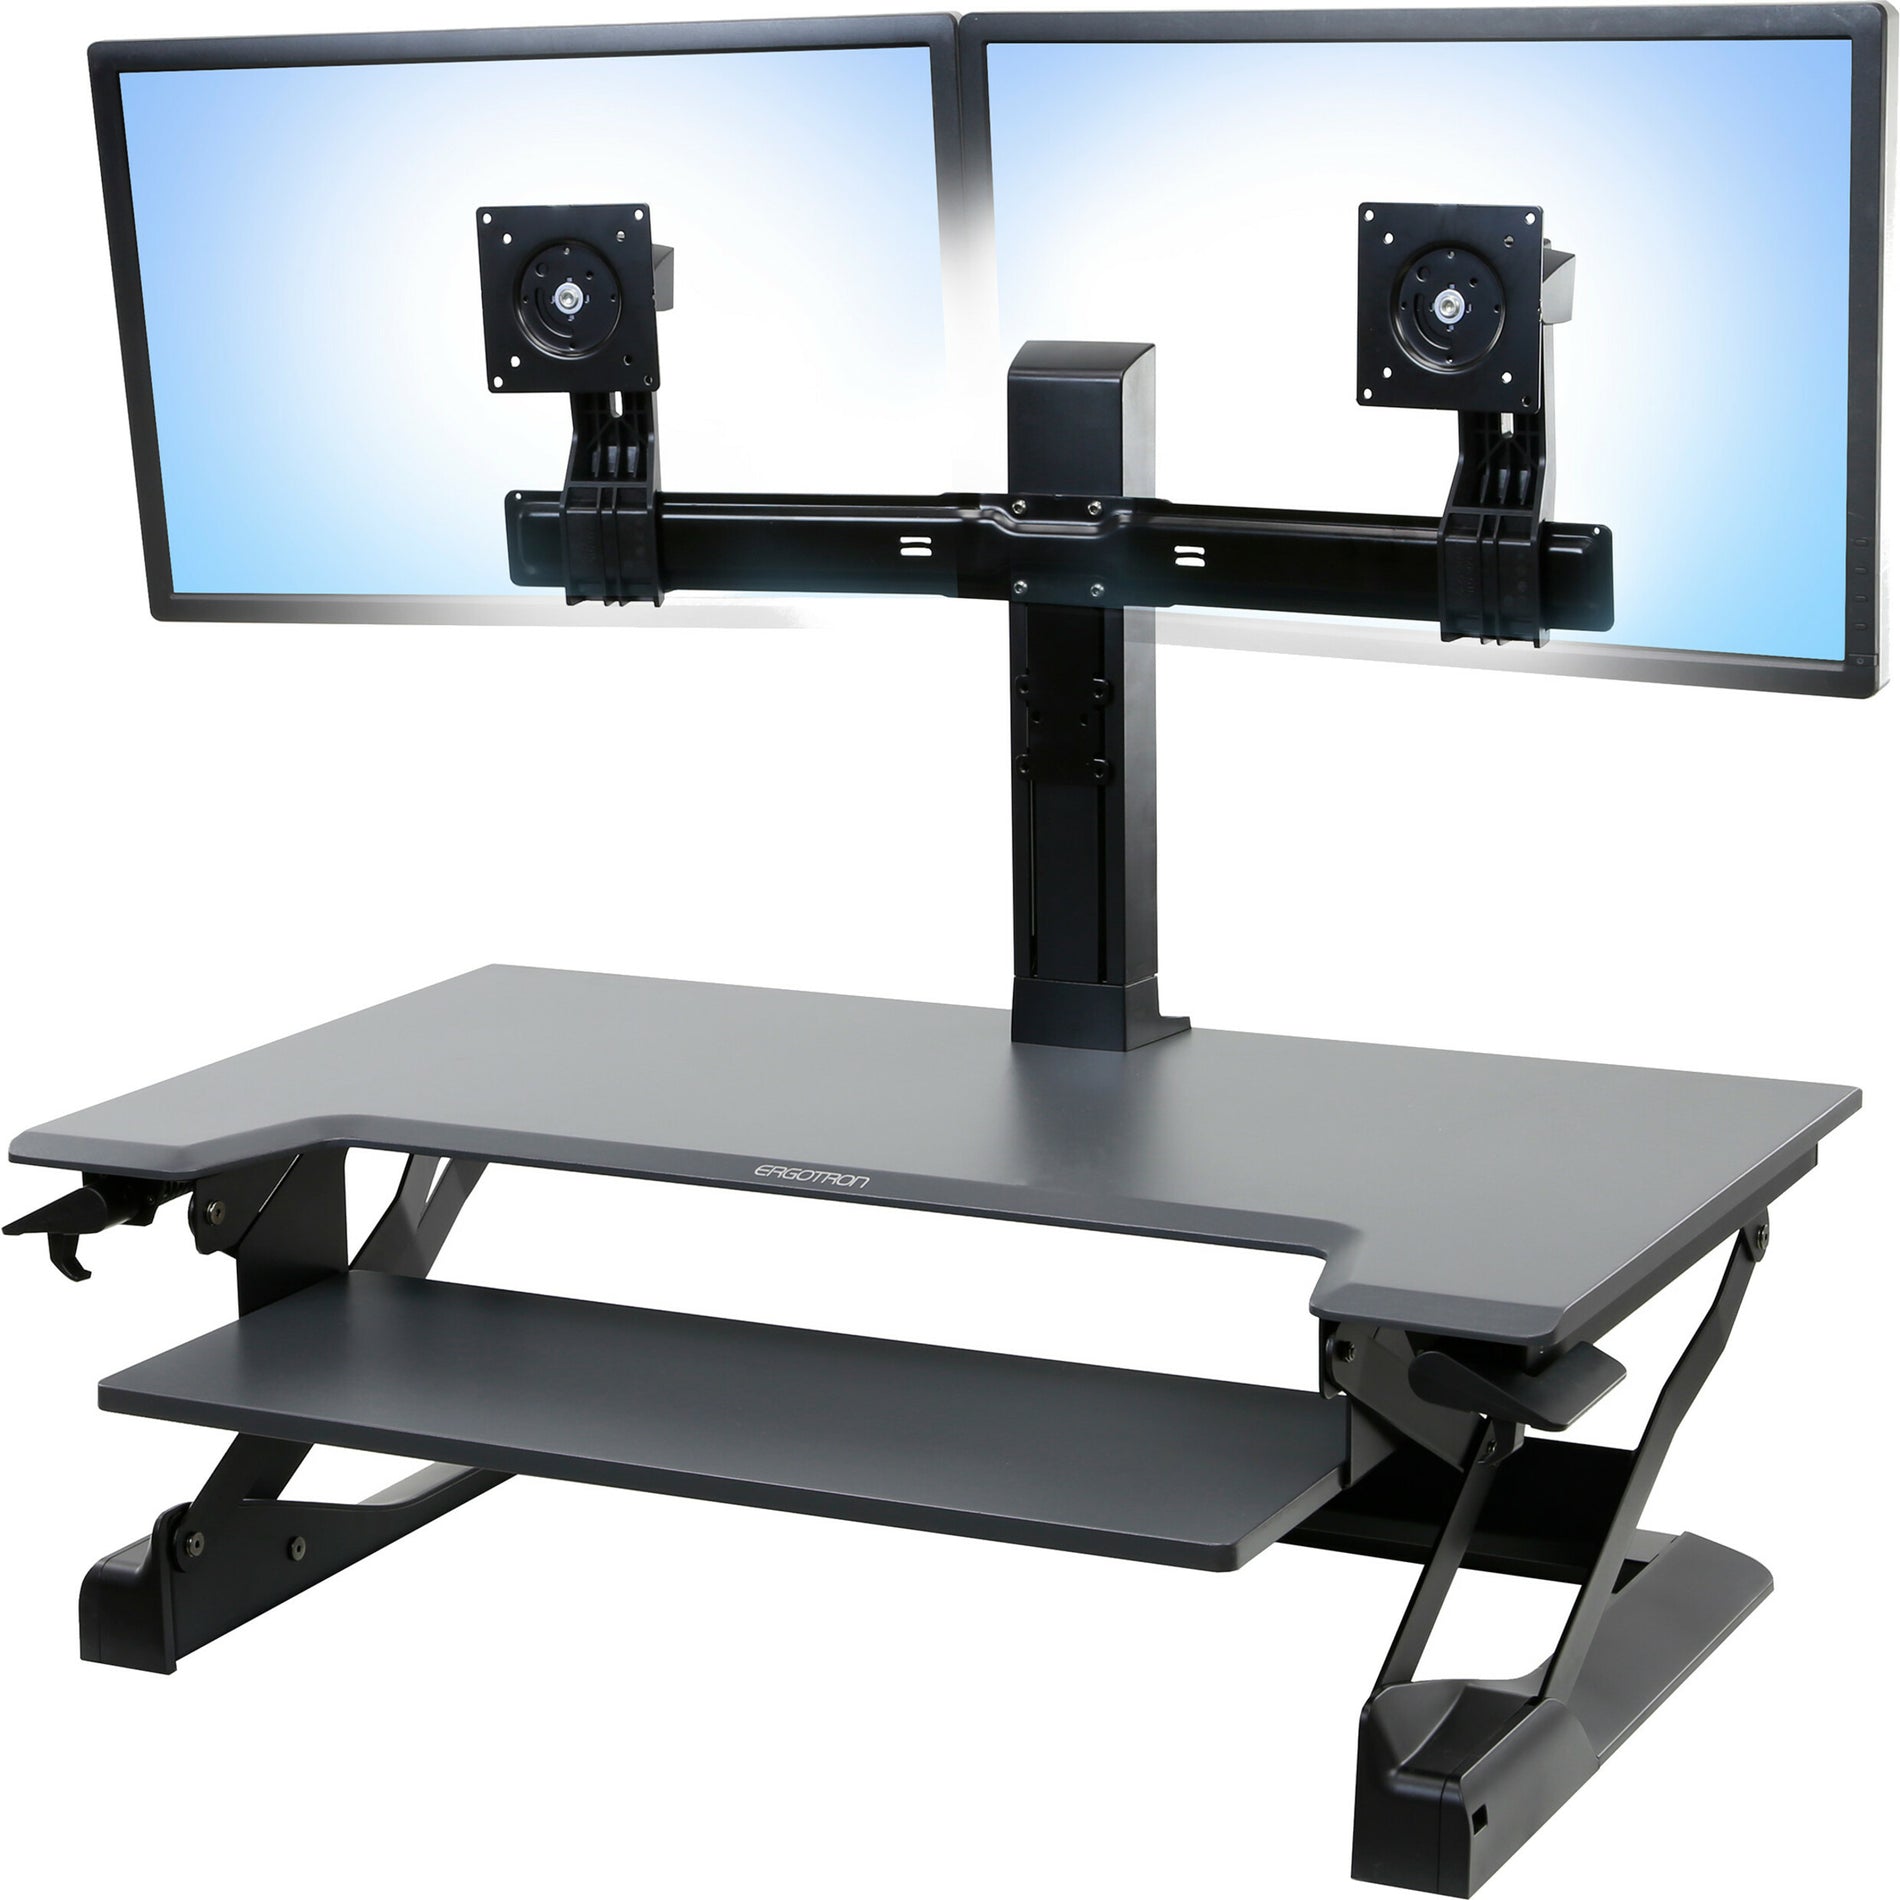 Ergotron 97-615 Tall-User Kit for WorkFit Dual, Improve Ergonomics and Accommodate Tall Users